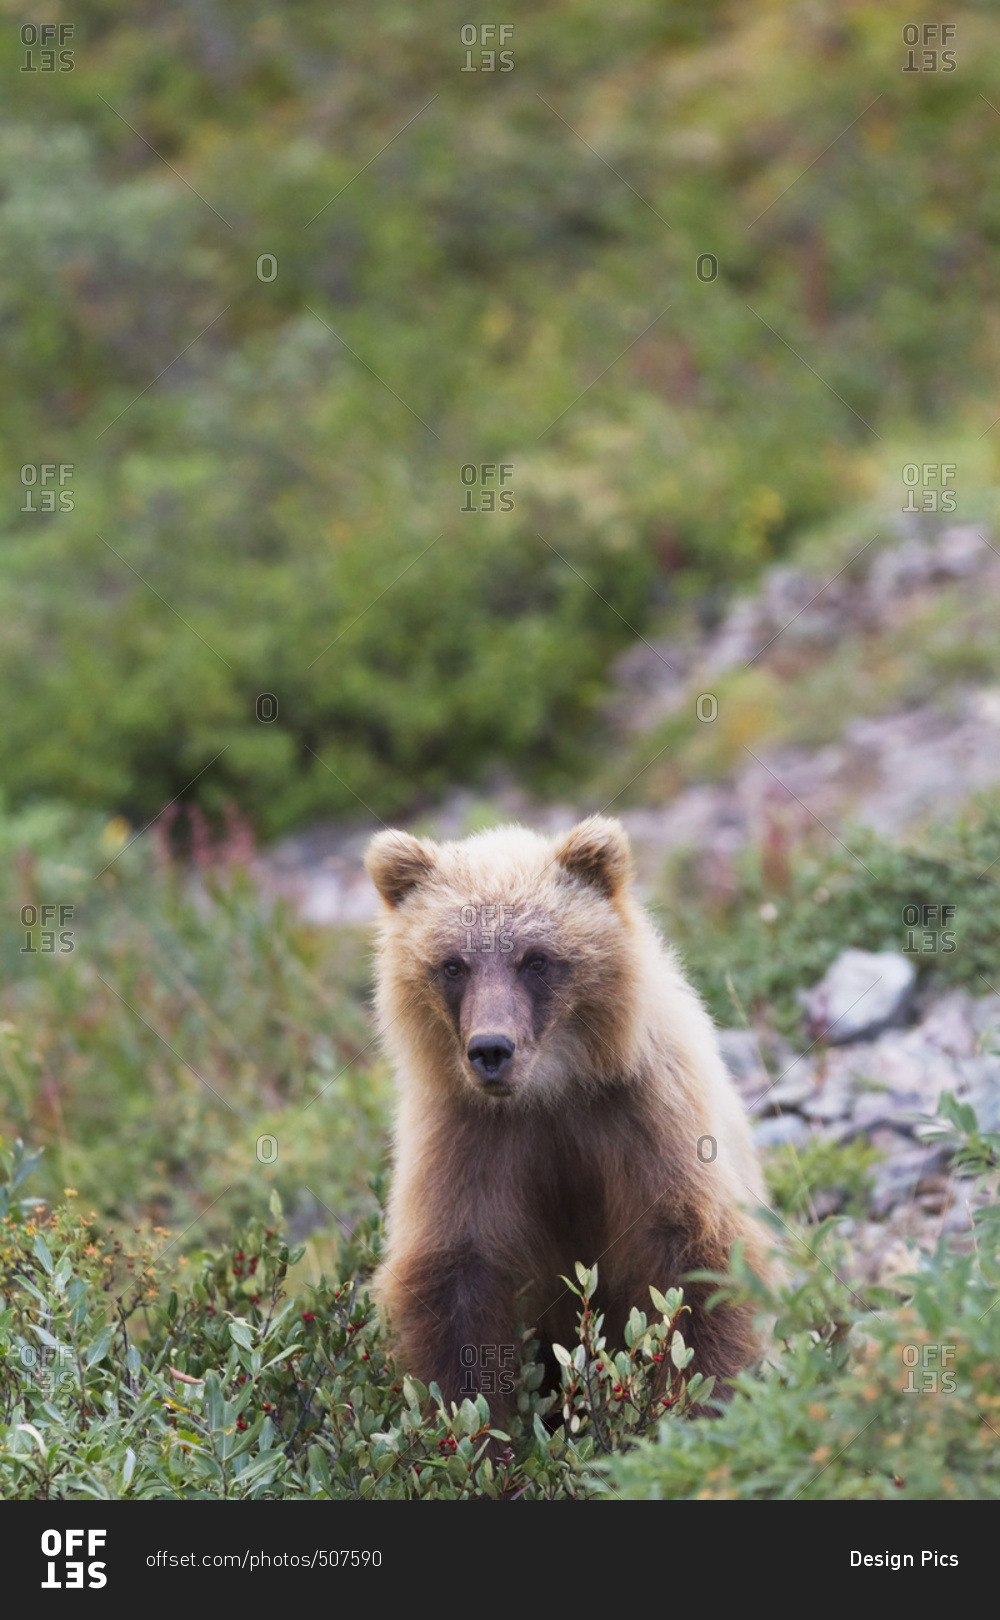 Grizzly (ursus arctos horribilis) cub on park road and looking at camera, Denali National Park and Preserve, interior Alaska in summertime; Alaska, United States of America